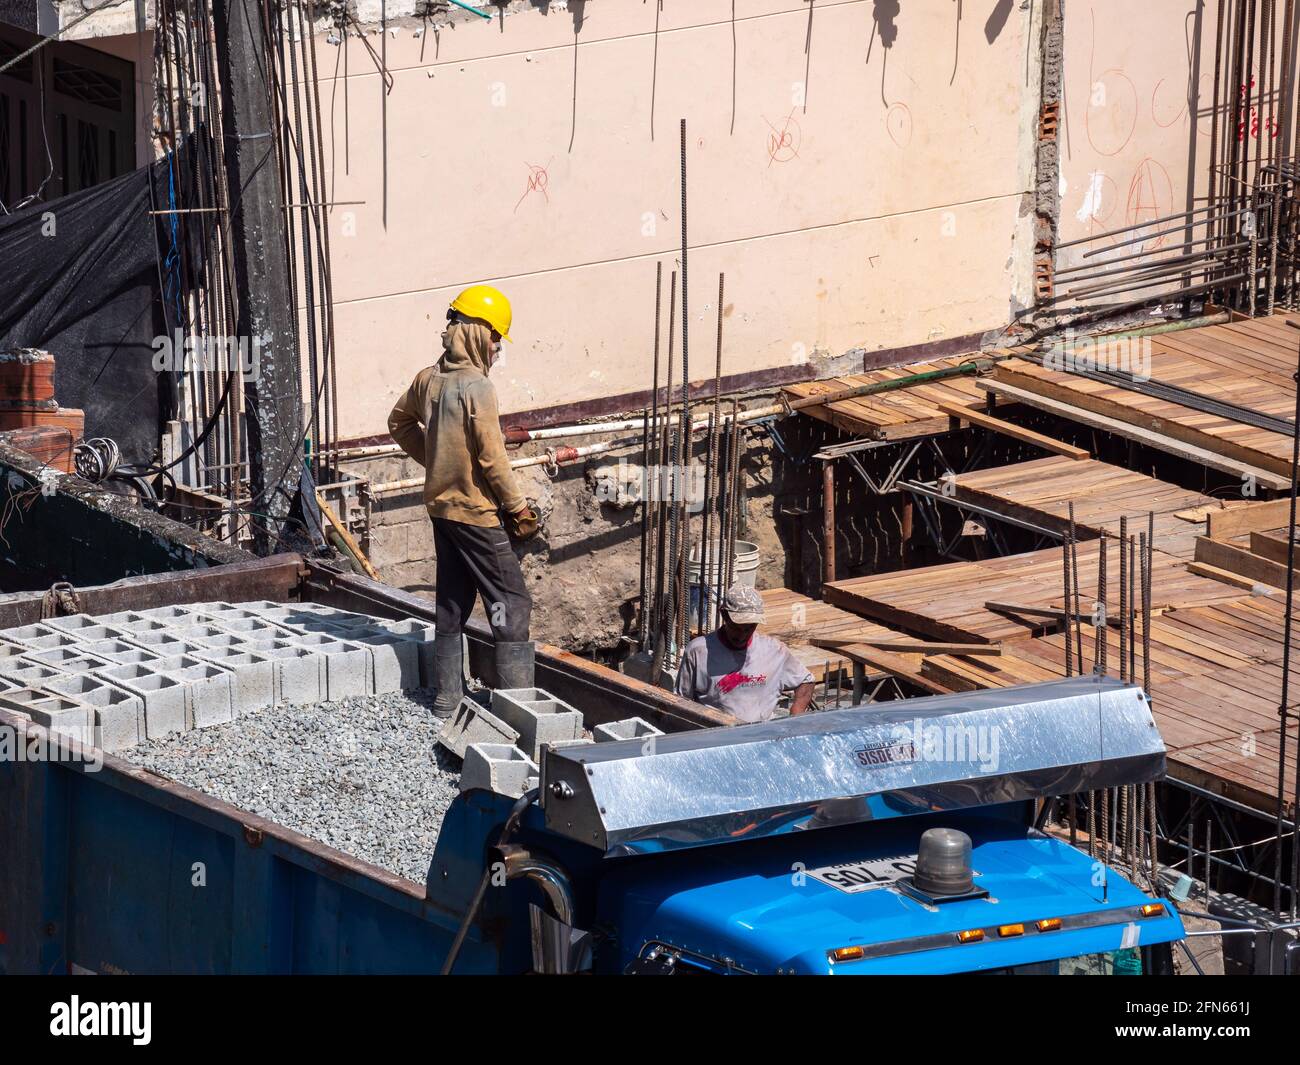 Medellin, Antioquia, Colombia - December 23 2020: Brown Men with Yellow Helmets Working on a Building Construction Site Stock Photo